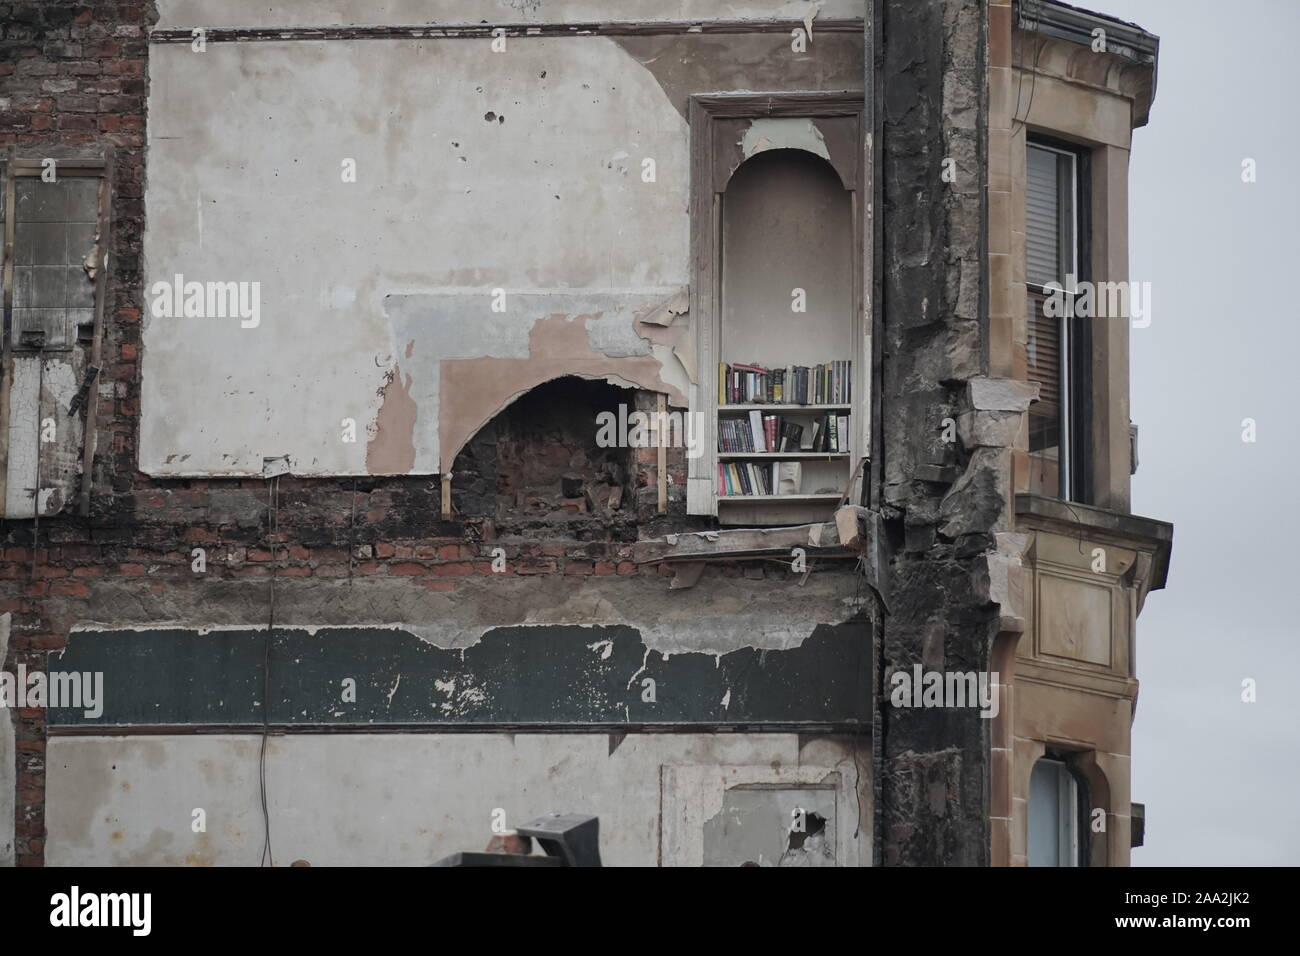 Glasgow, UK. 19th Nov, 2019. Demolition continues following a fire and a collapse of a tenement building in Pollokshields in Glasgow. A single book shelf reminds of once a cosy home, including titles such as Stephen King and Decoder Credit: Pawel Pietraszewski/Alamy Live News Stock Photo